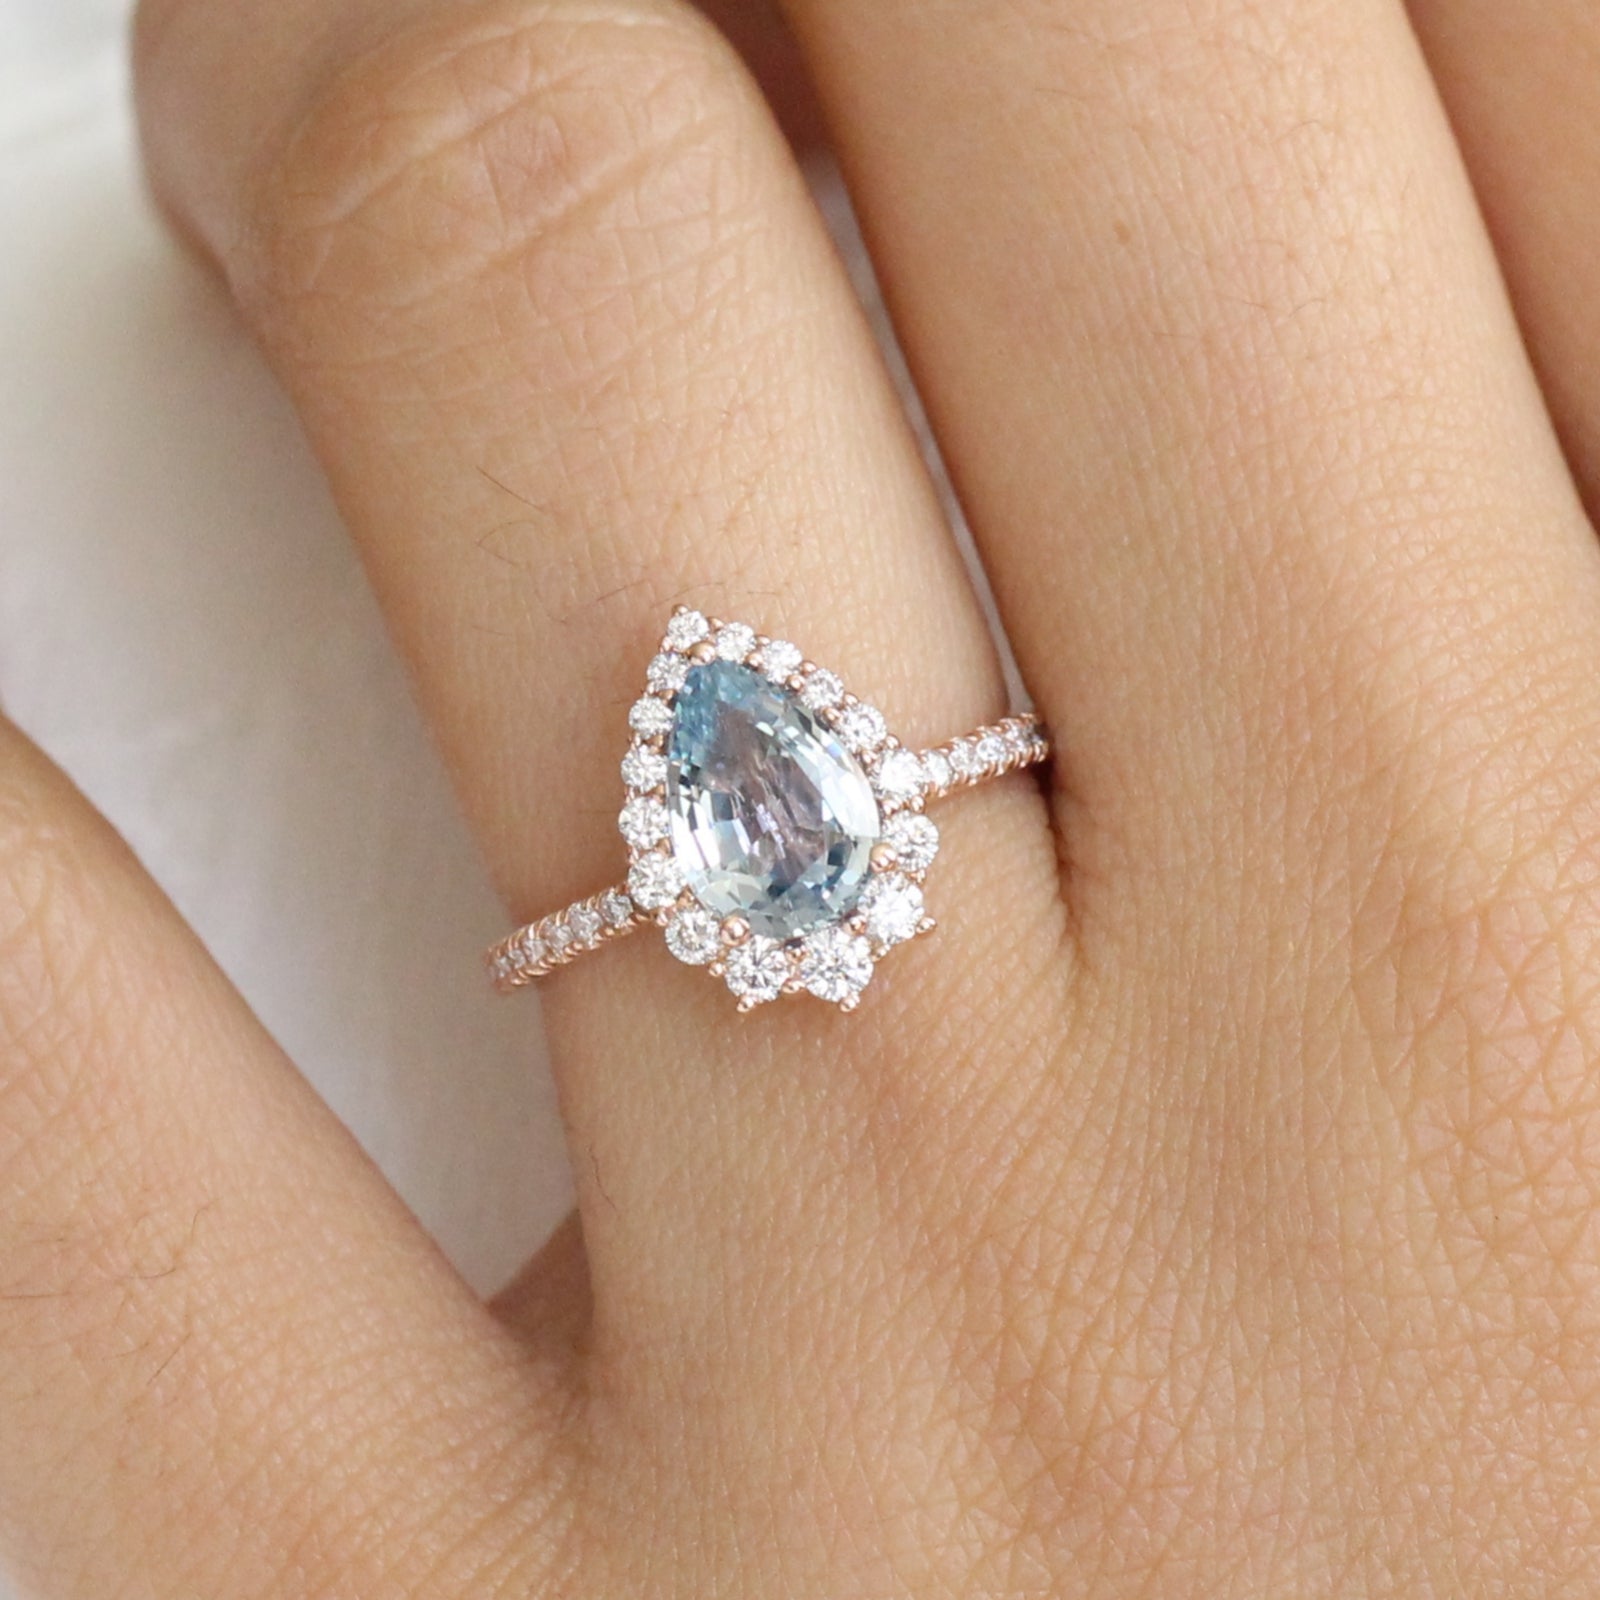 Aqua Blue Sapphire Engagement Ring Rose Gold Halo Diamond Pear Ring by La More Design Jewelry